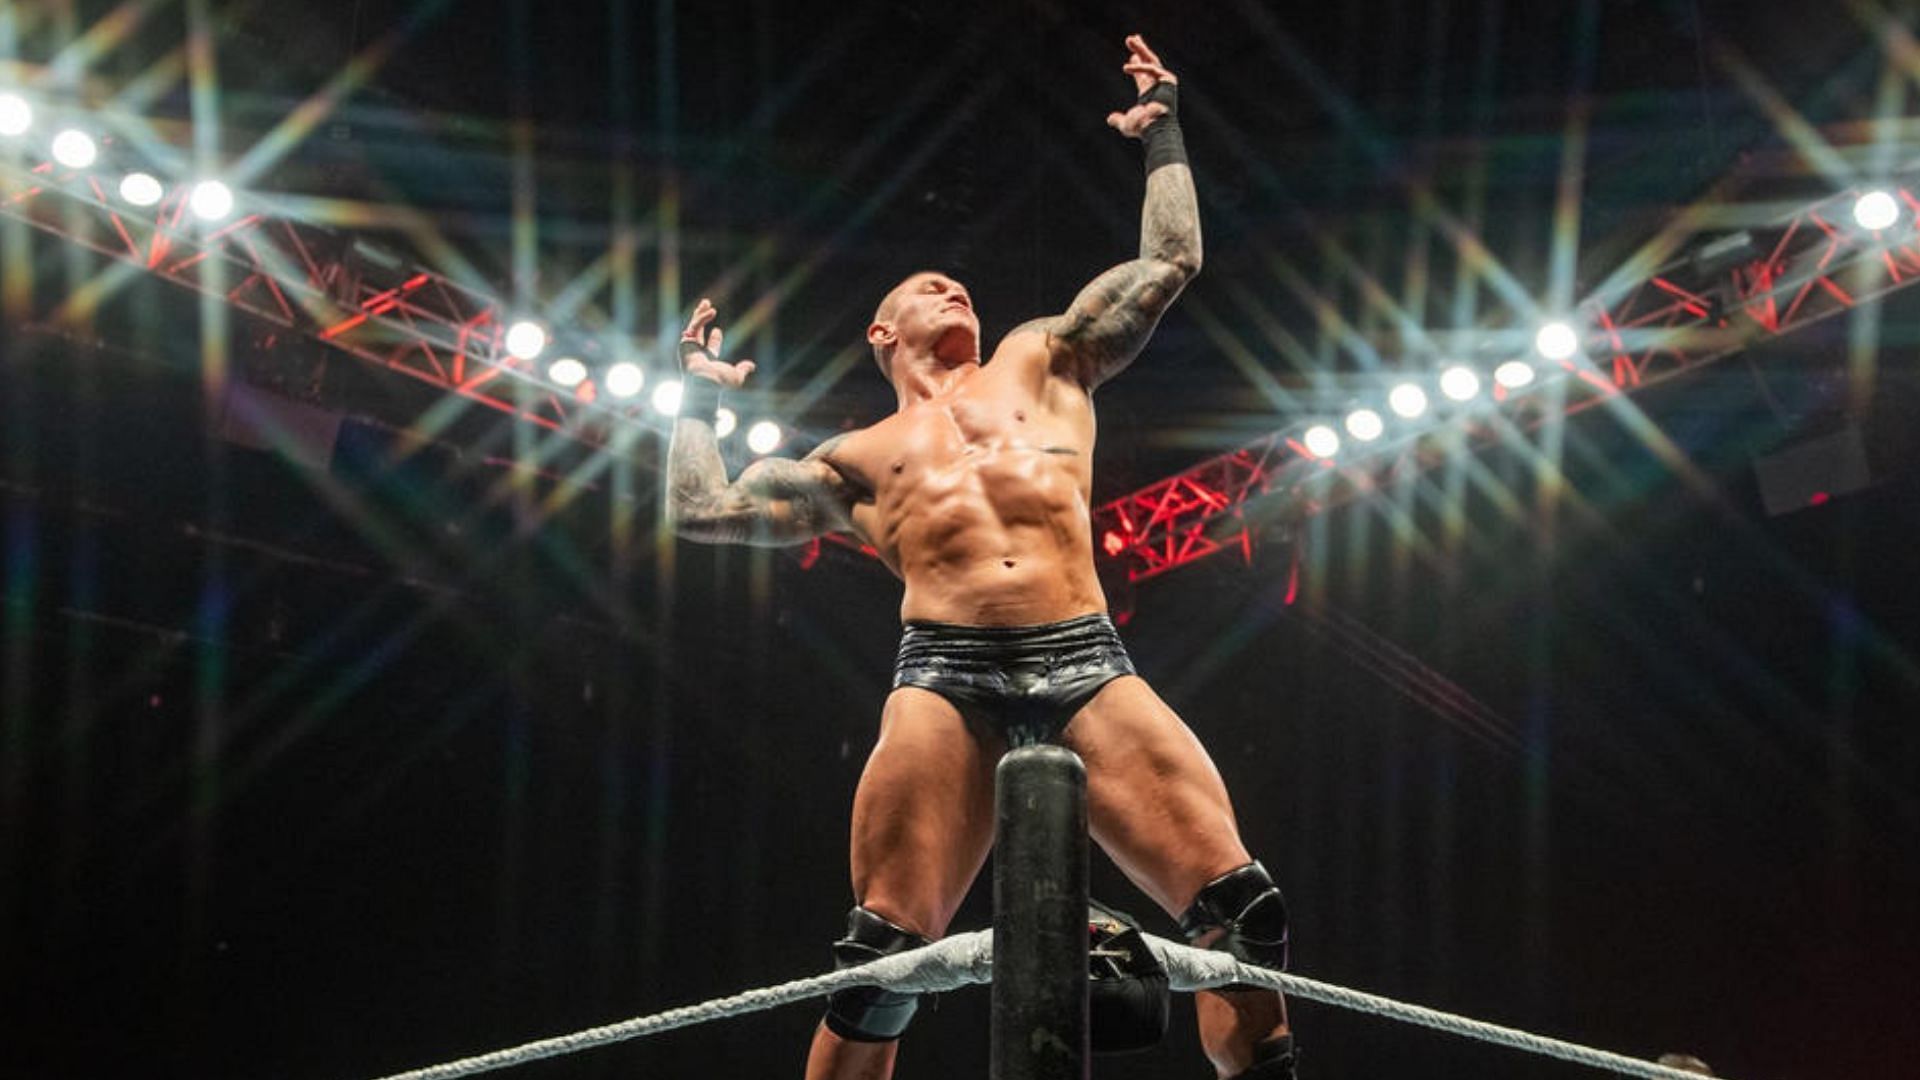 Randy Orton is one of the most respected stars on WWE